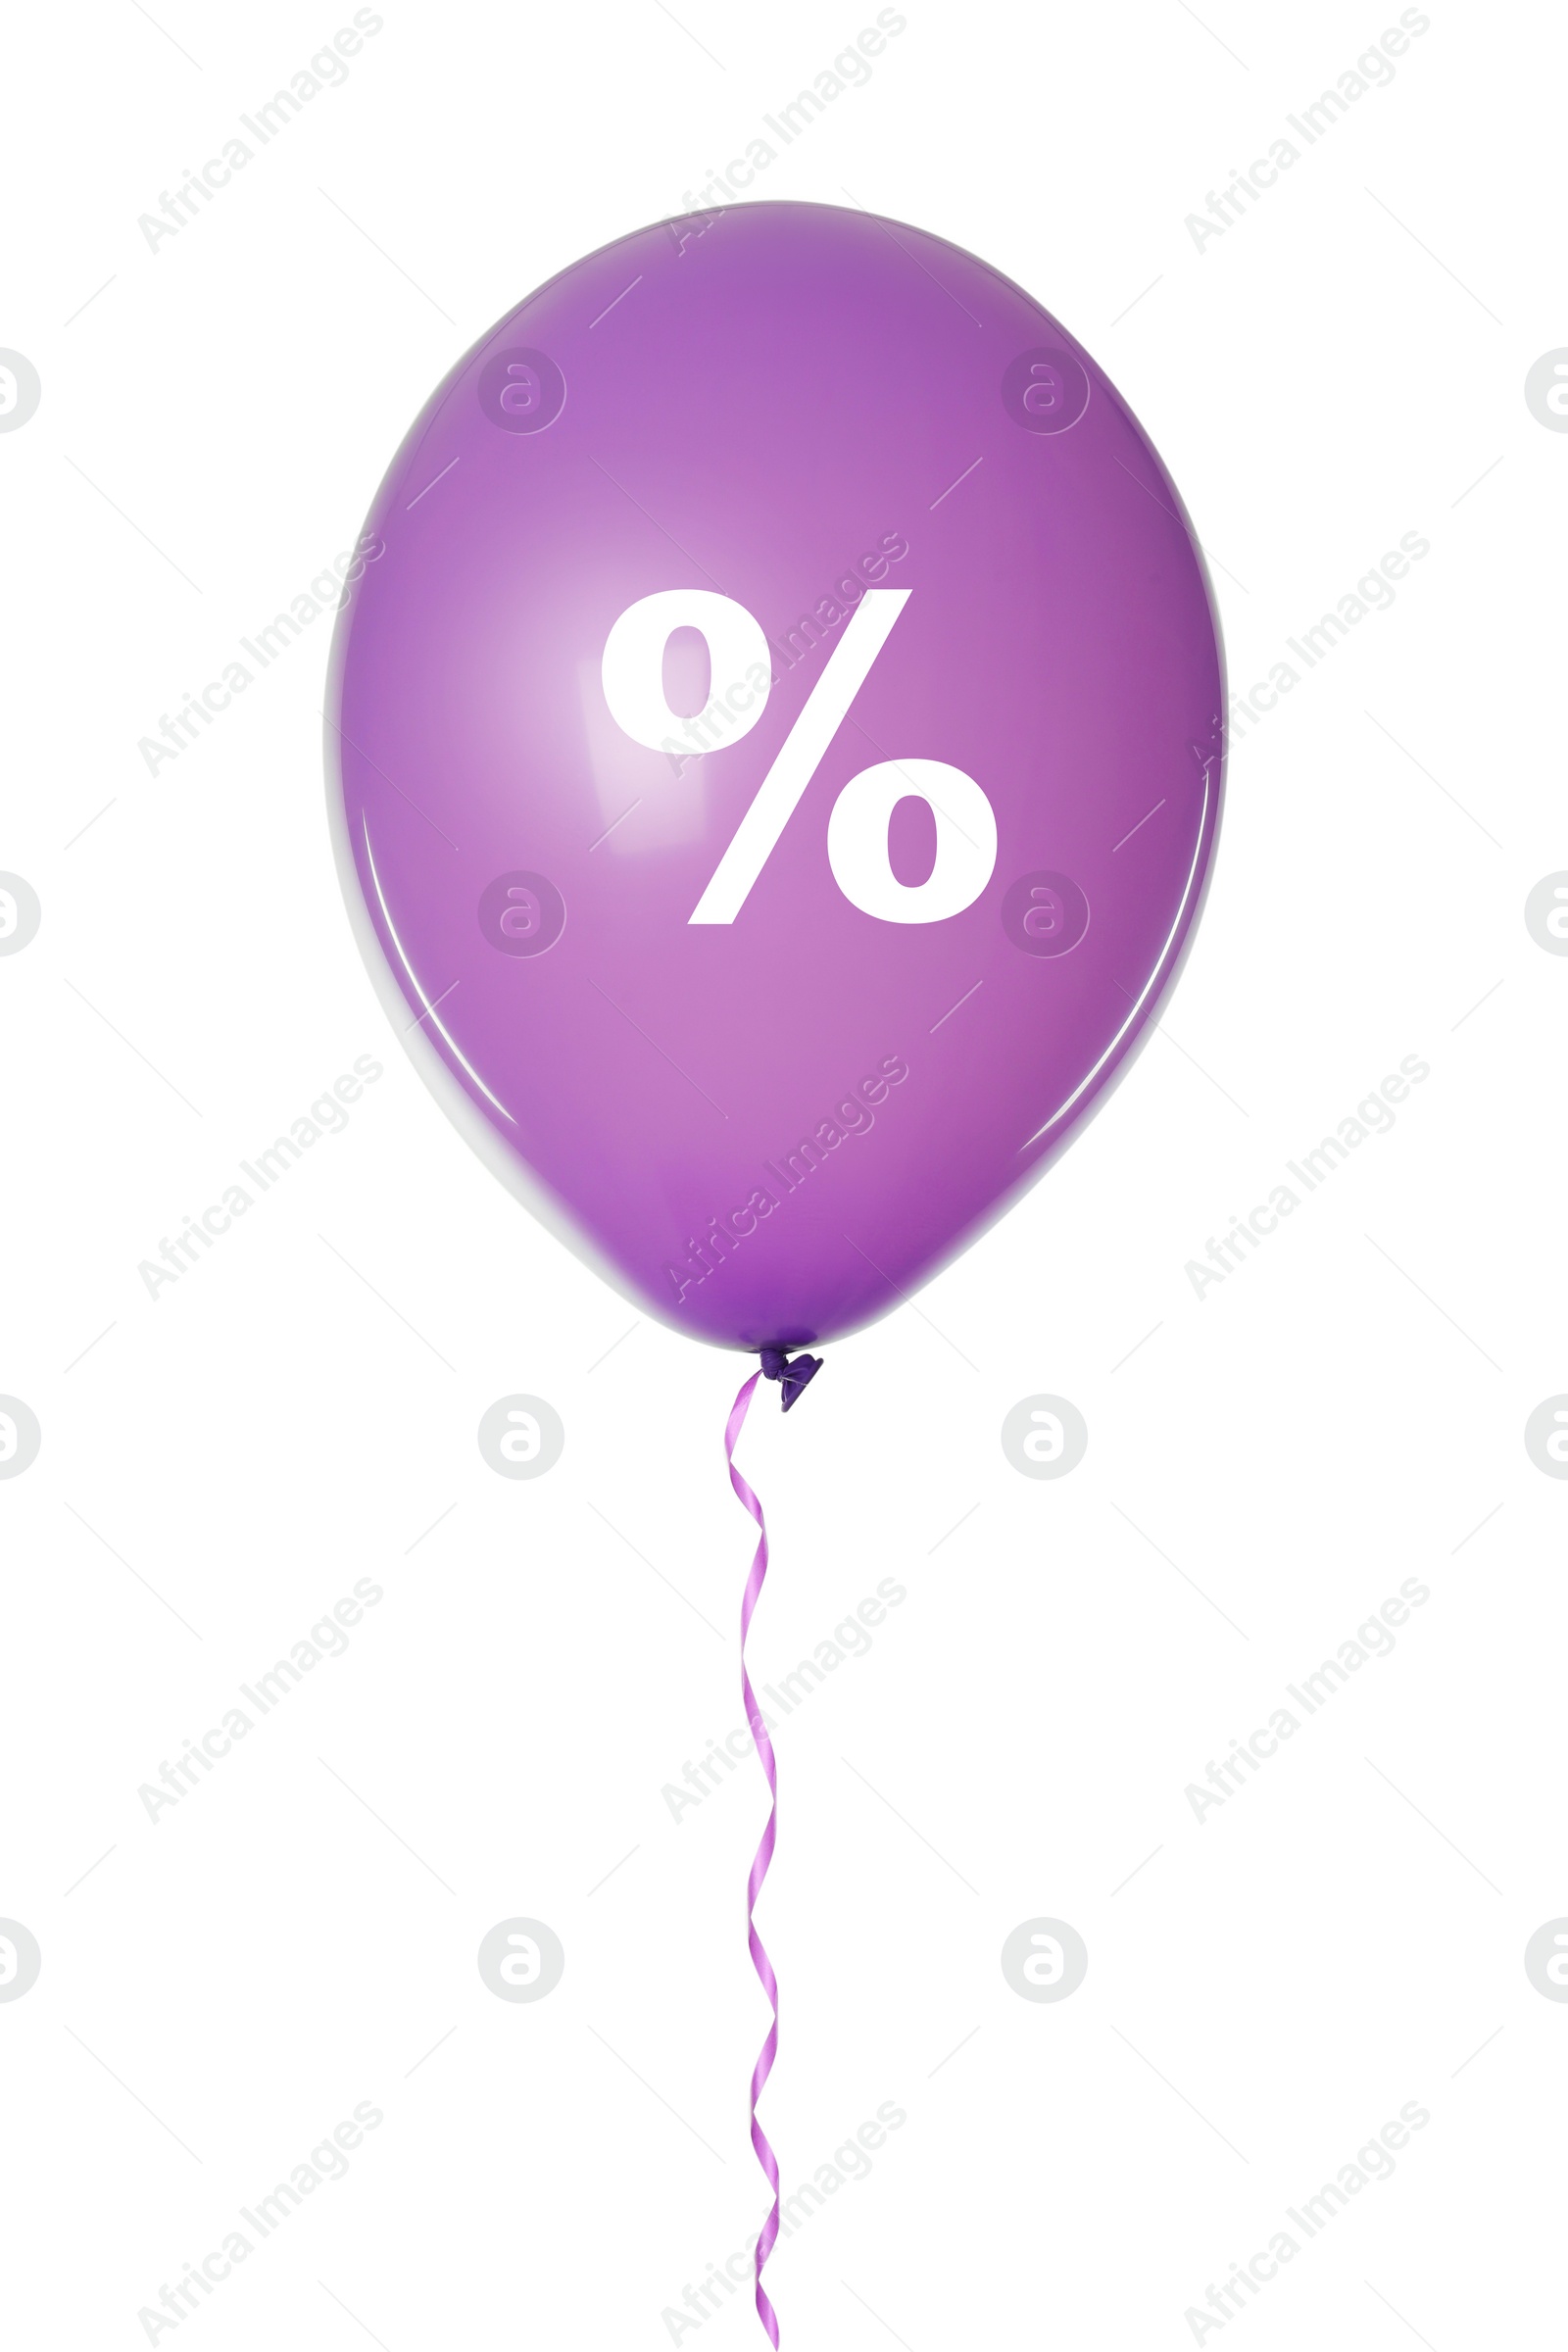 Image of Discount offer. Violet balloon with percent sign on white background